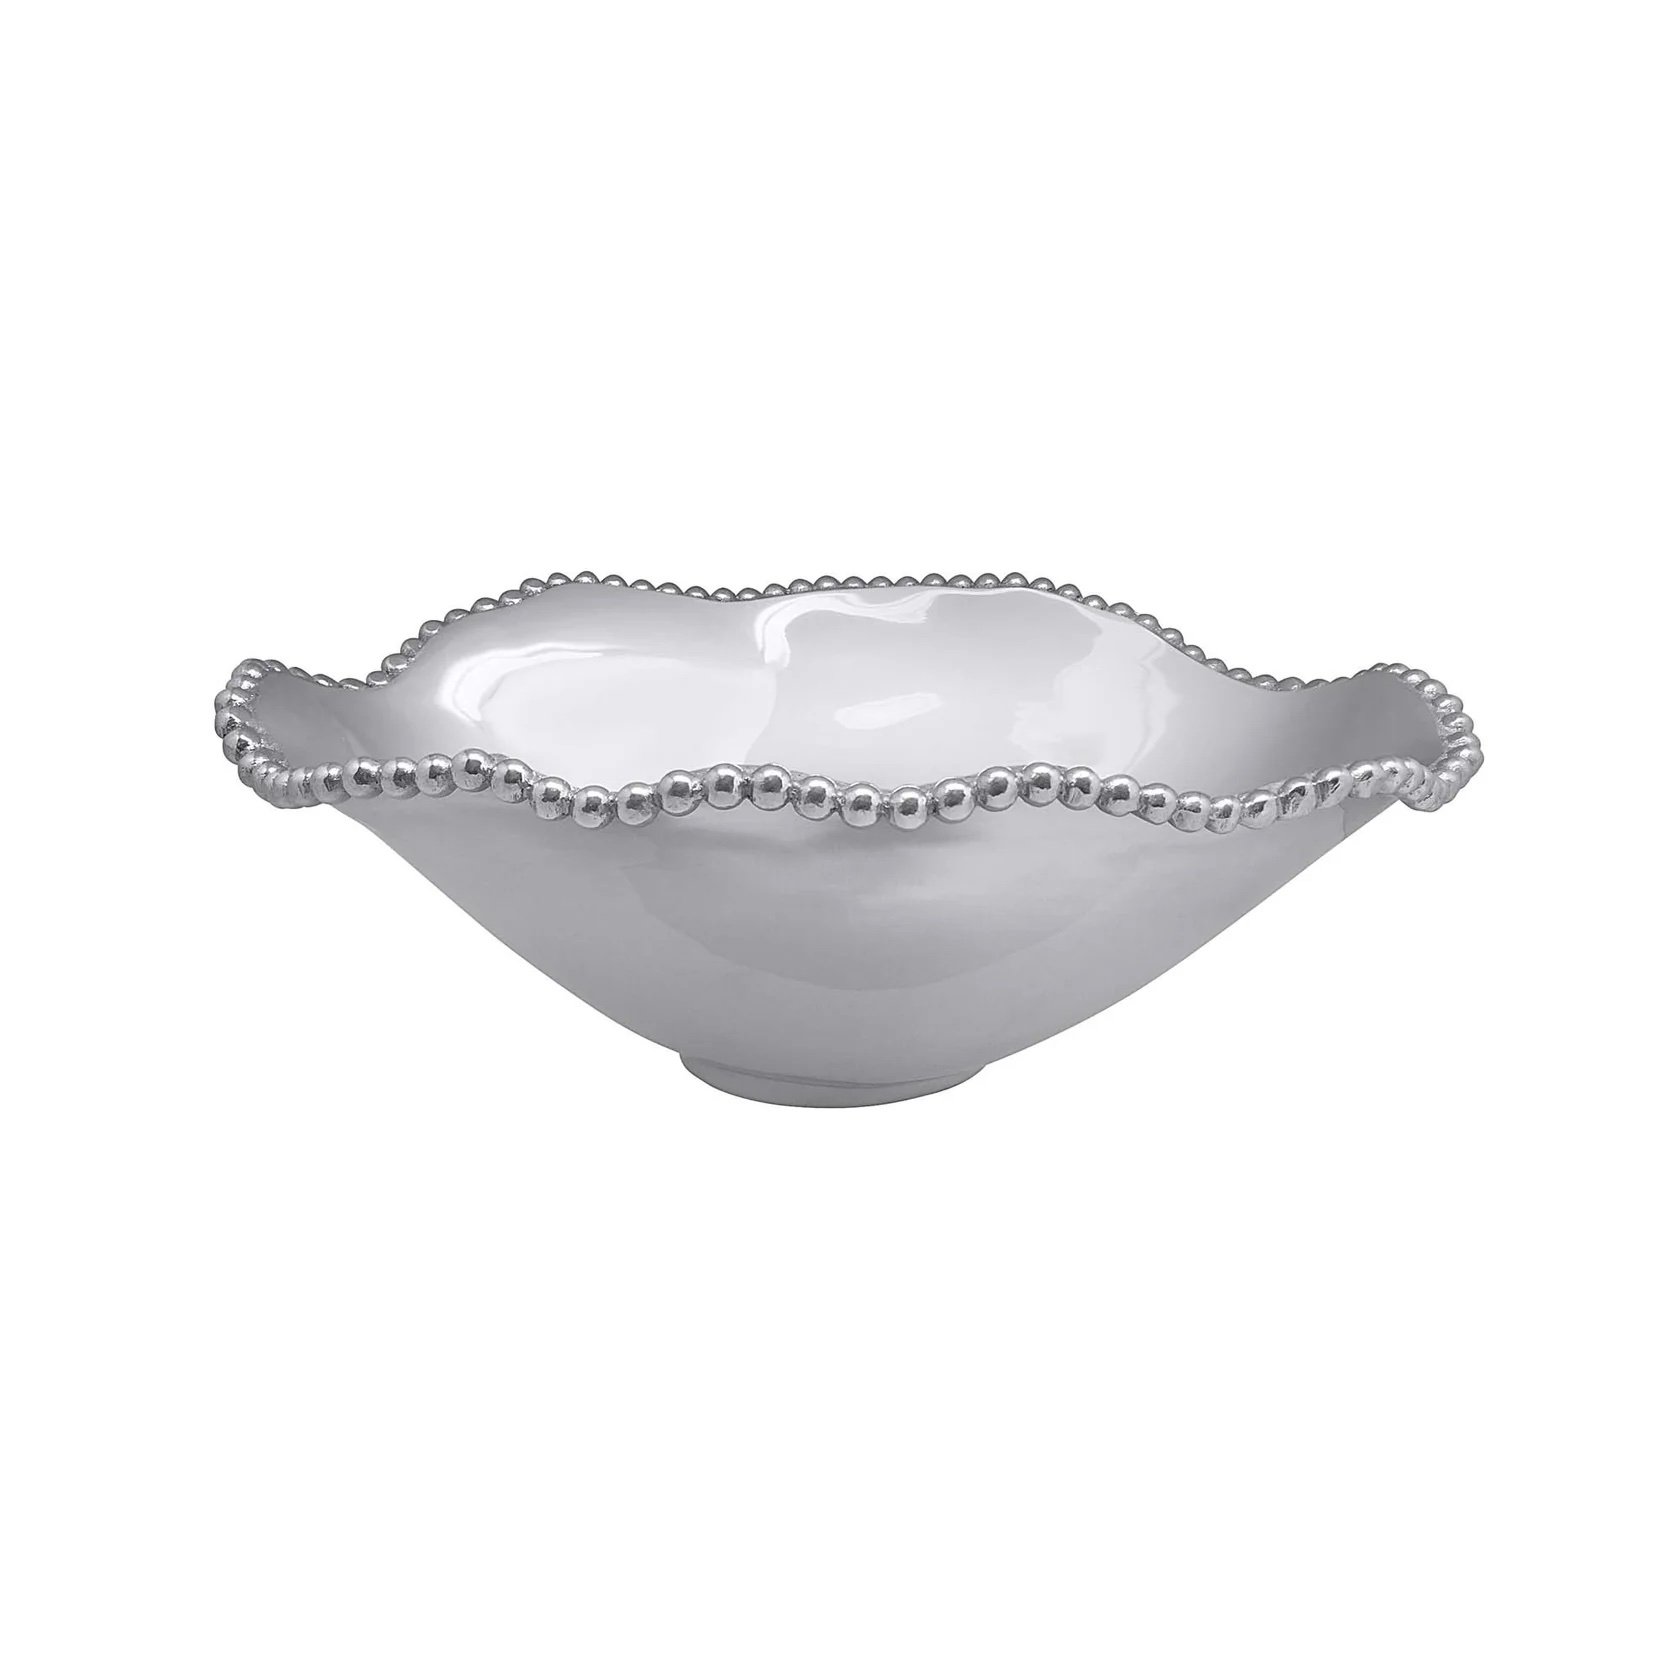 30846- Pearled Oval Wavy Bowl- $208- Purchased 